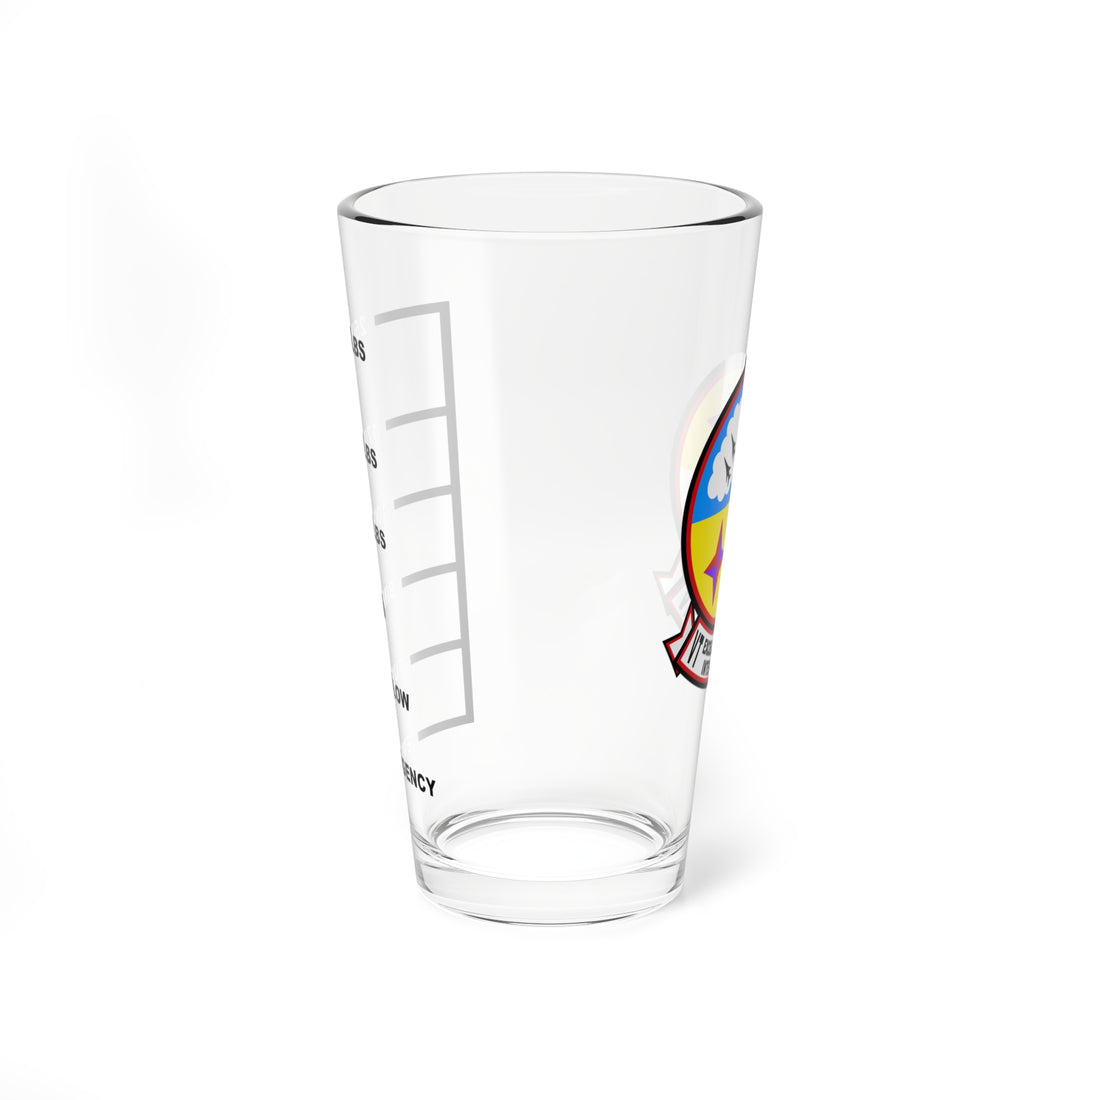 VT-4 "Bucks" Fuel Low Pint Glass Mixing Glass, 16oz, Navy, Aviation, Wings, Veteran, Helicopter, T-34, Marines, Training